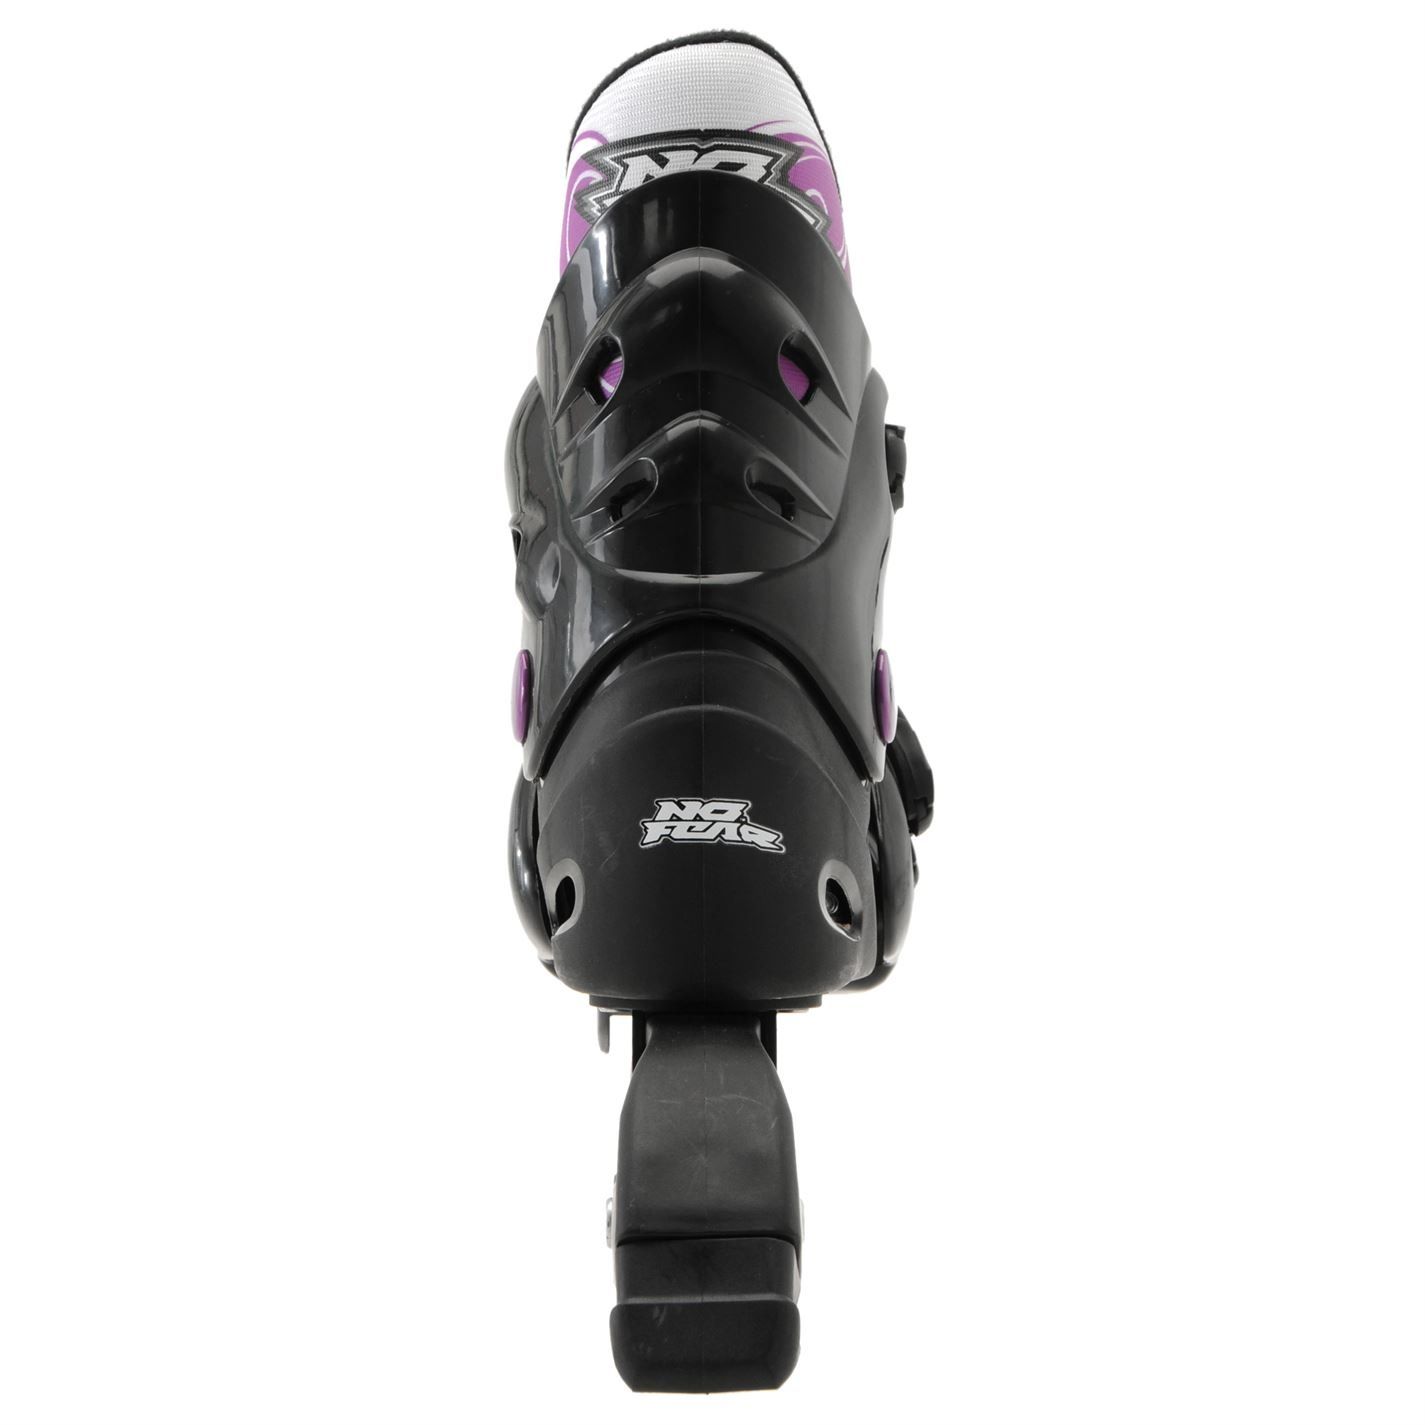 No Fear Inline Skate Womens - The No Fear Inline Skate Womens are great for anyone wanting to give skating a go and with the three clasp fastening offer great support. The skates also benefit from a separate liner to allow a comfortable skate.  > Womens Skates > PP boot chassis > Quick lock buckles > Heel stop brake (right boot only) > Push button size adjustment > 72mm PVC wheels > 608z bearings > Upper and Sole: synthetic, Inner: textile > Min user weight: 20kg > Max user weight: 60kg